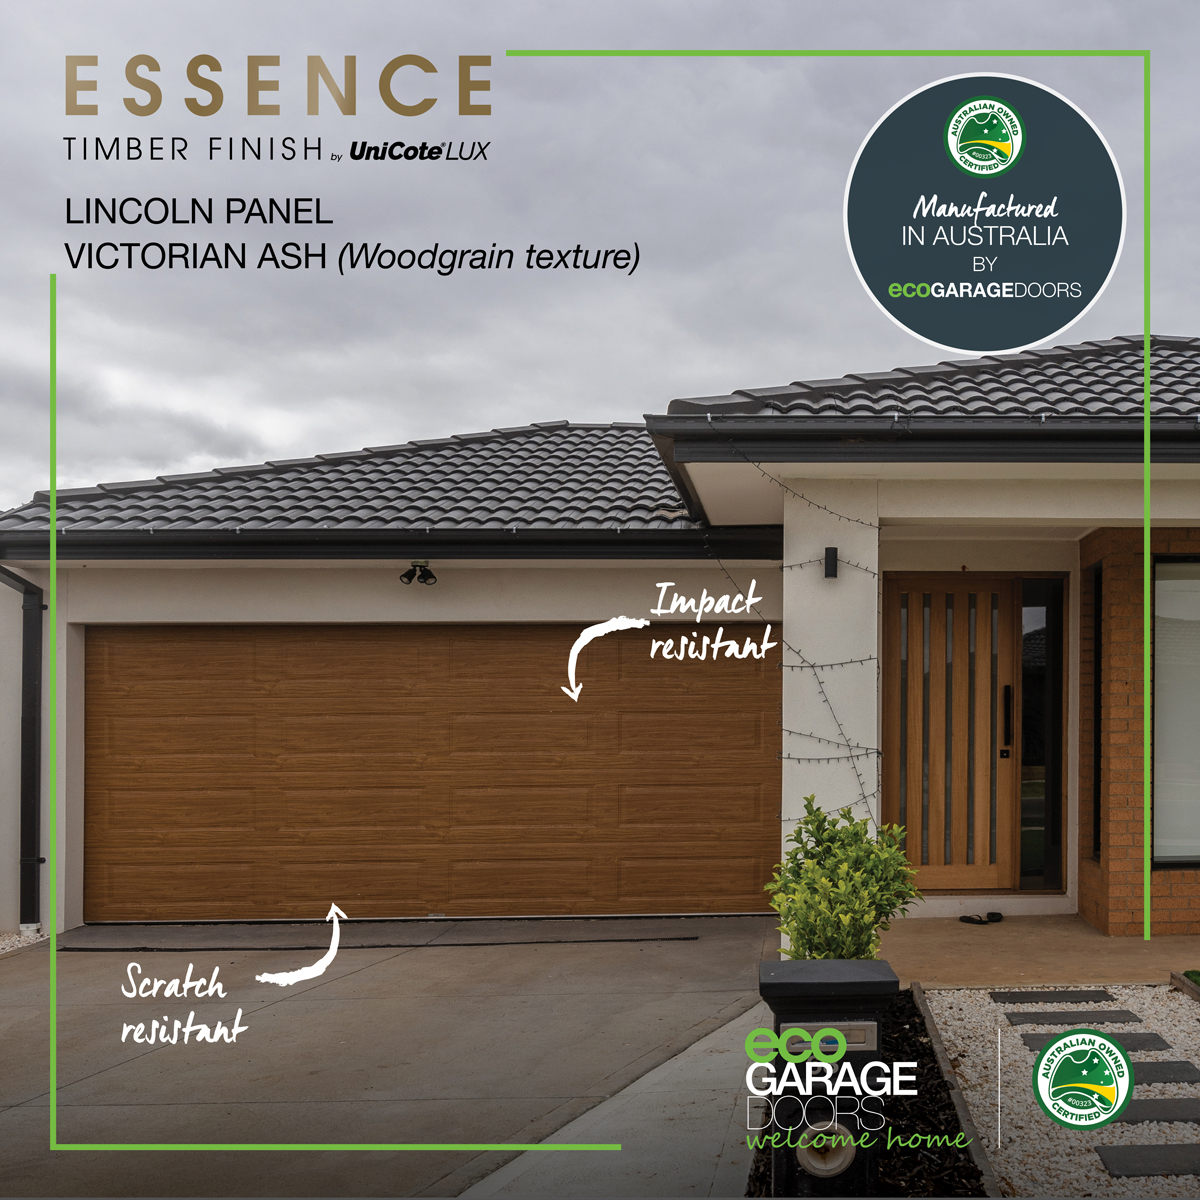 essence-timber -finish-lincoln-panel-victorian-ash